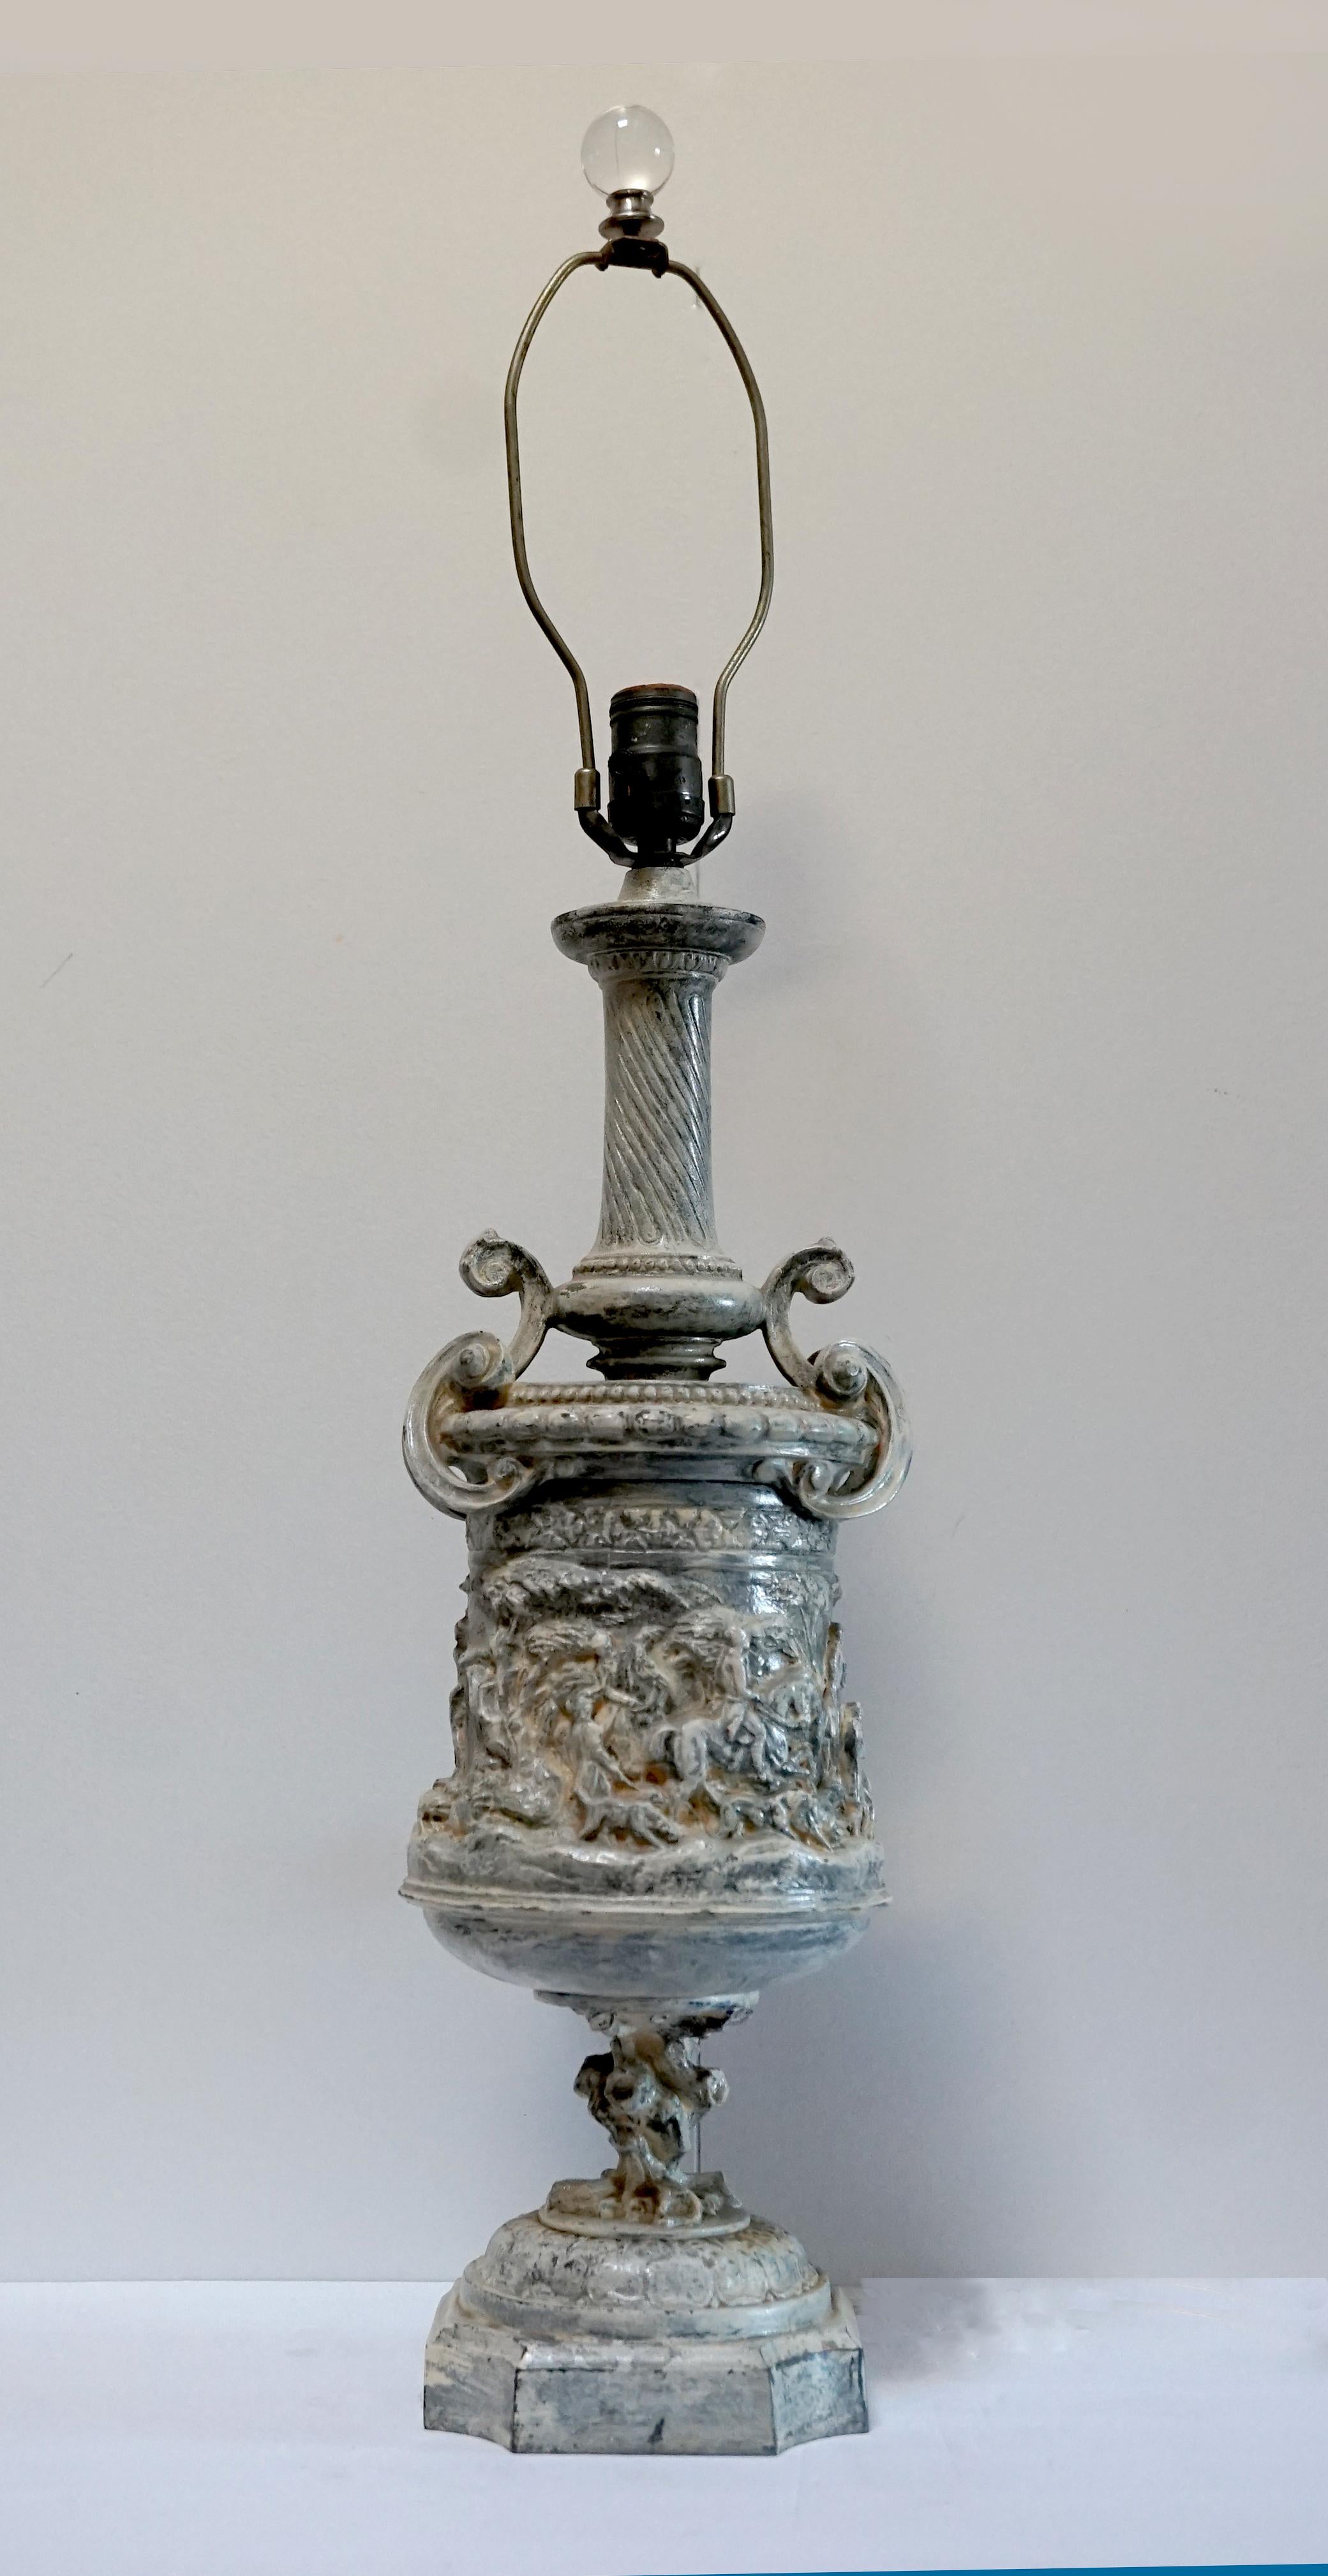 The white enamel wash, the scene reminiscent of a classical Greek or Roman setting, and the urn form make this French Zinc lamp unique and irresistible. The antique Neoclassical style cast metal footed urn lamp body probably 19th Century; probably